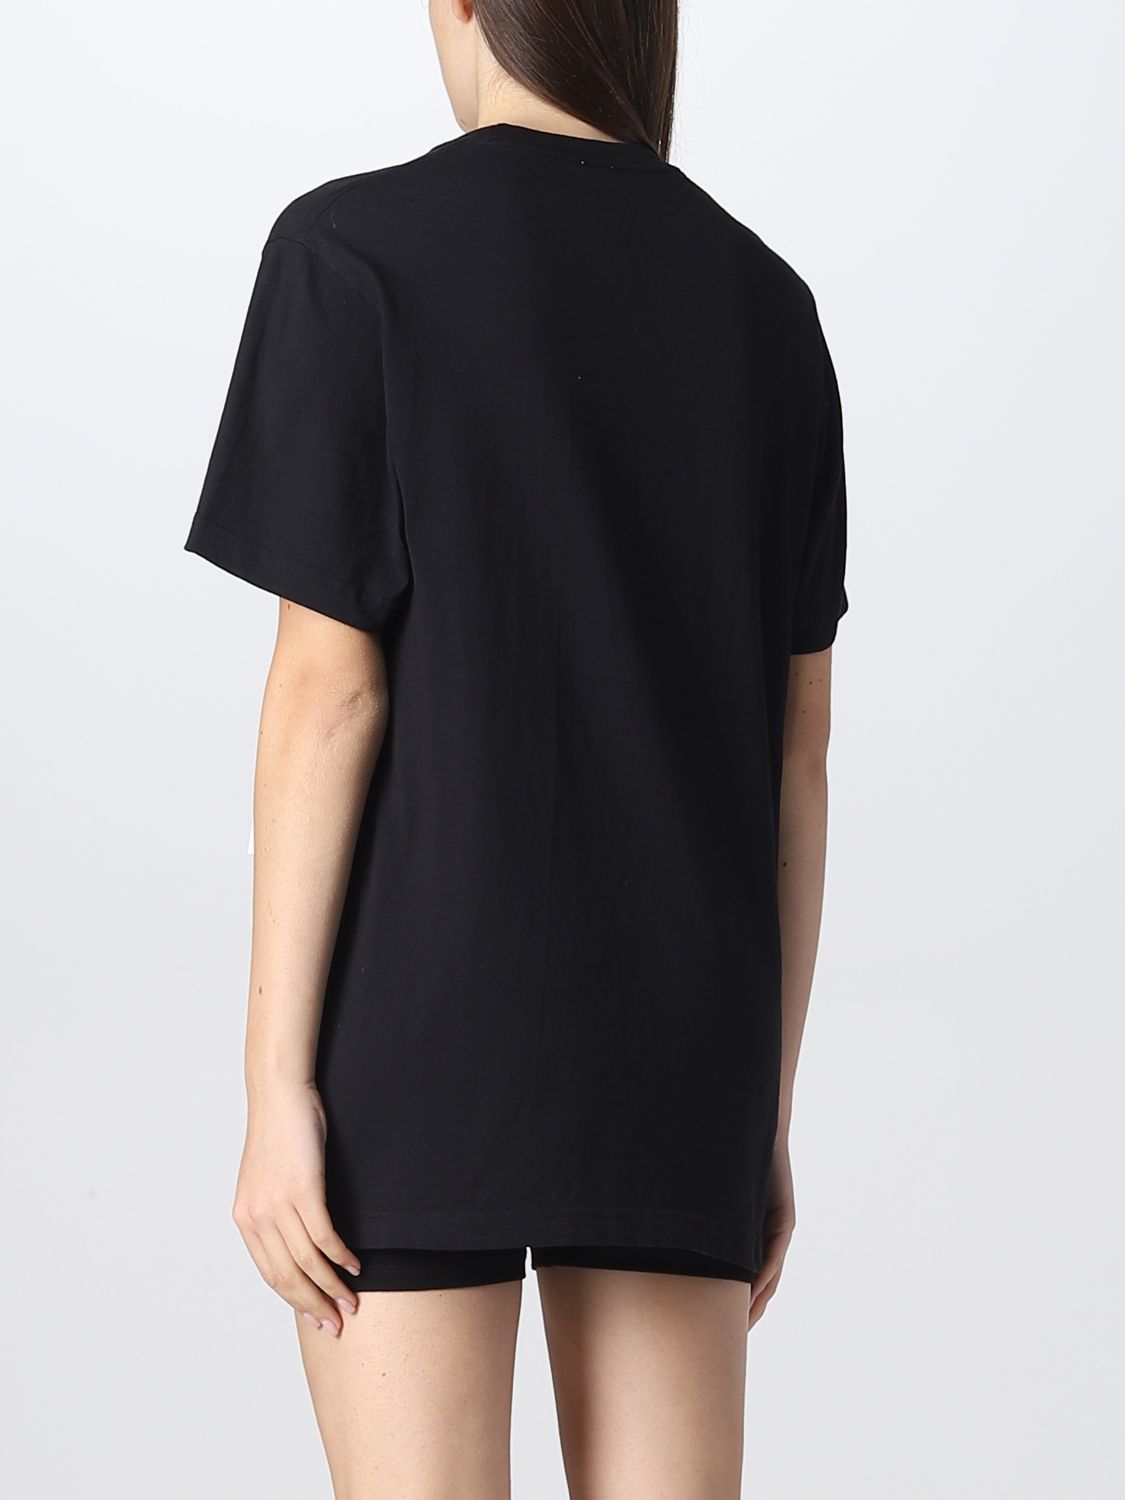 T-shirt Sporty & Rich: T-shirt Sporty & Rich con stampa wellness nero 3